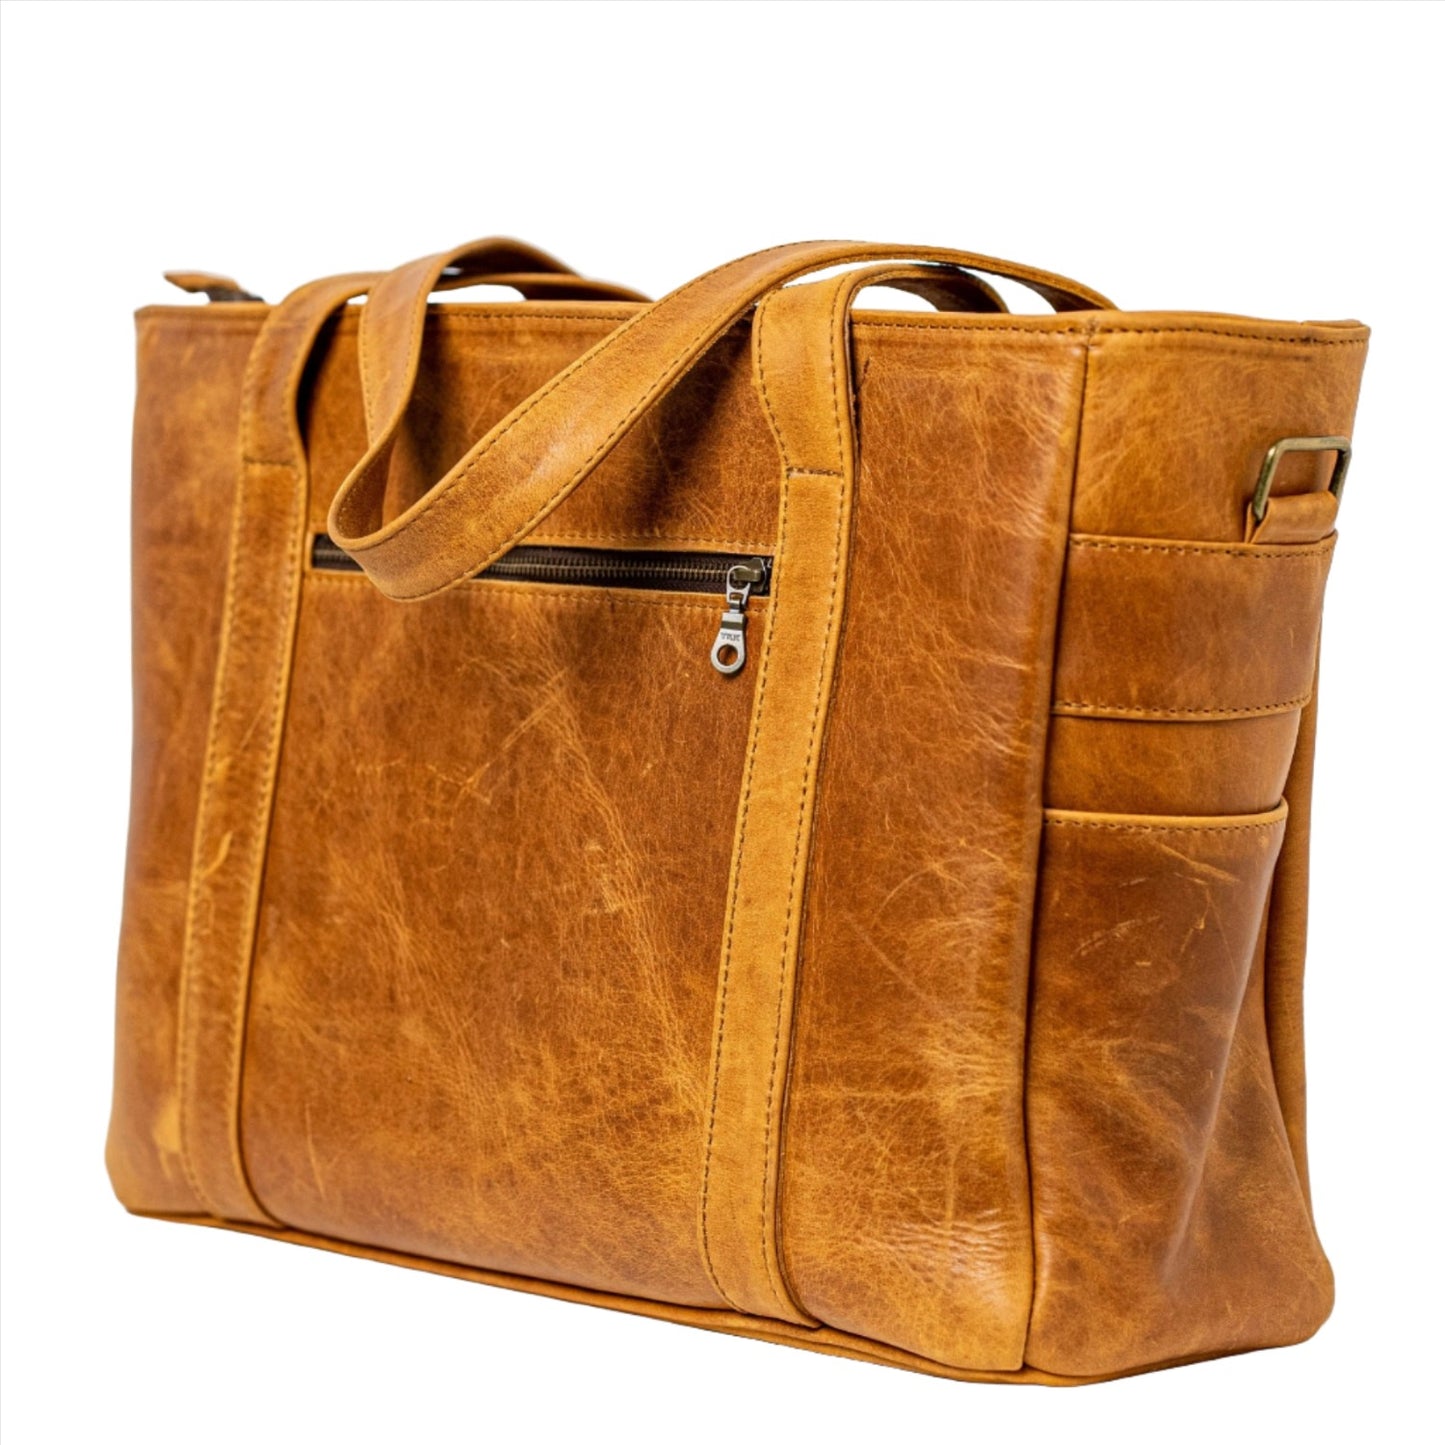 Ladies Laptop bags in Diesel Toffee tan made in Cape Town by Cape Masai leather 